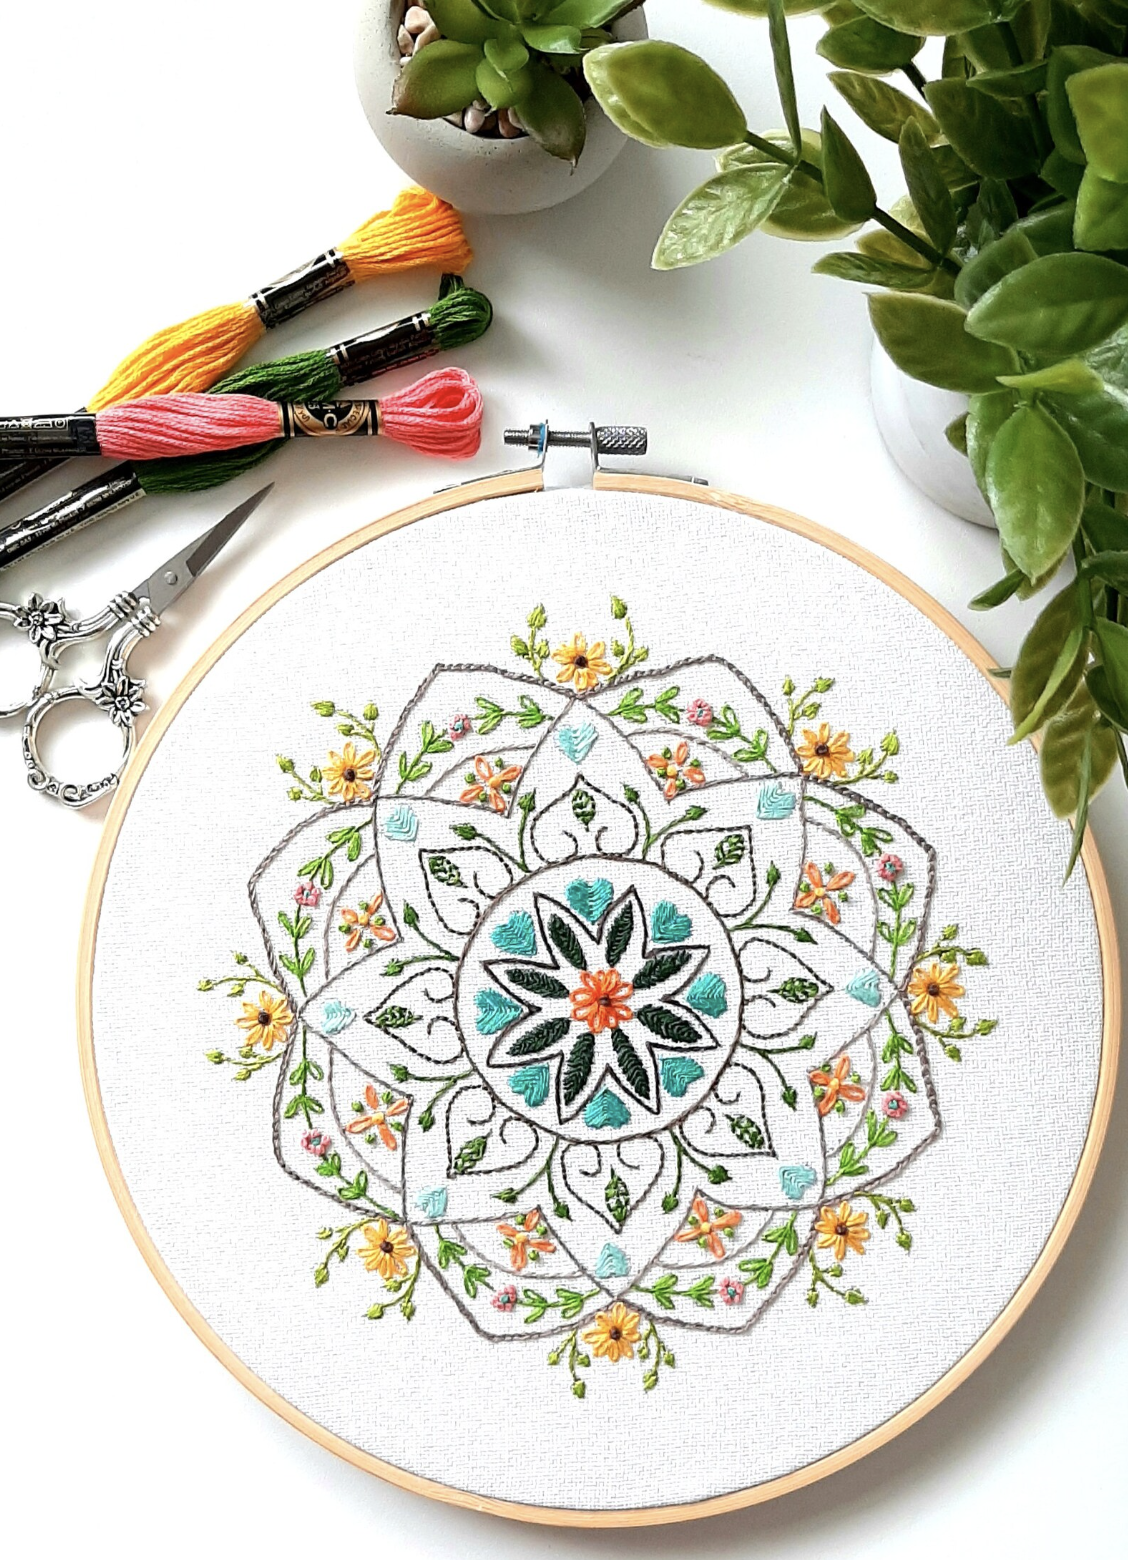 Mandalas embroidered with flowers